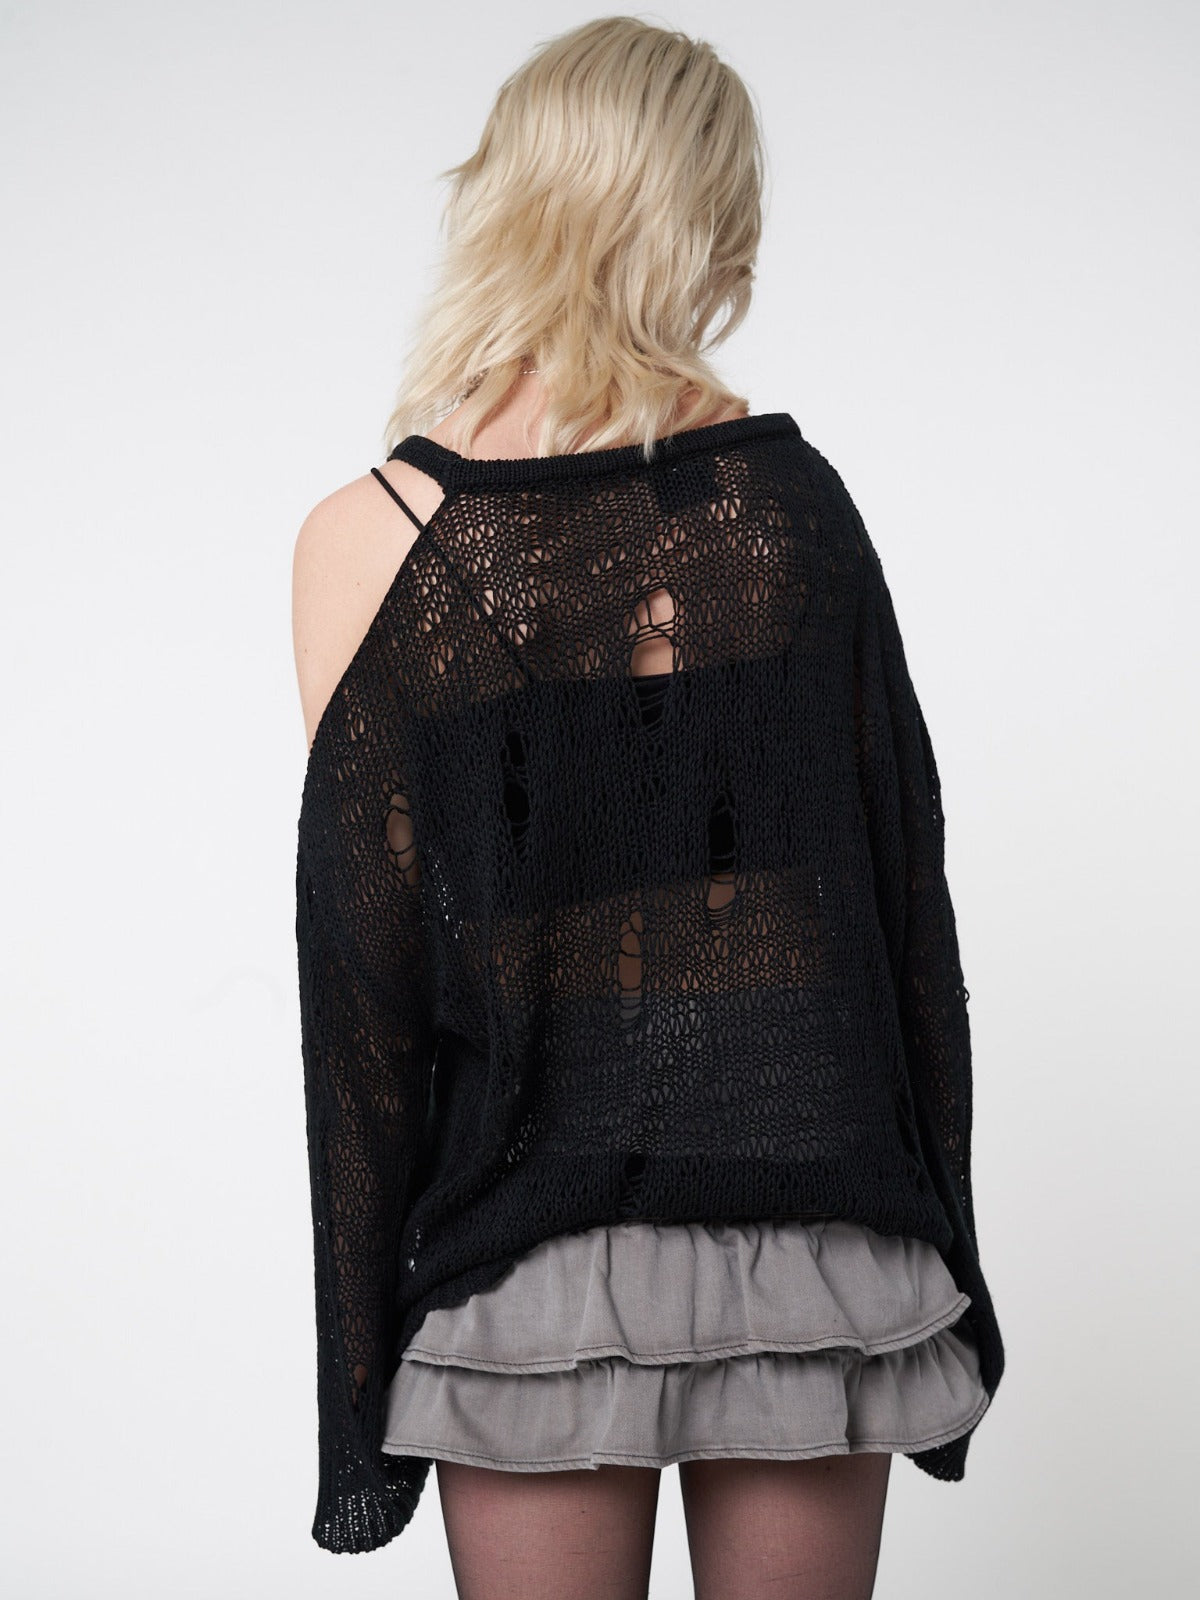 Net knitted jumper in black featuring all over distressed details